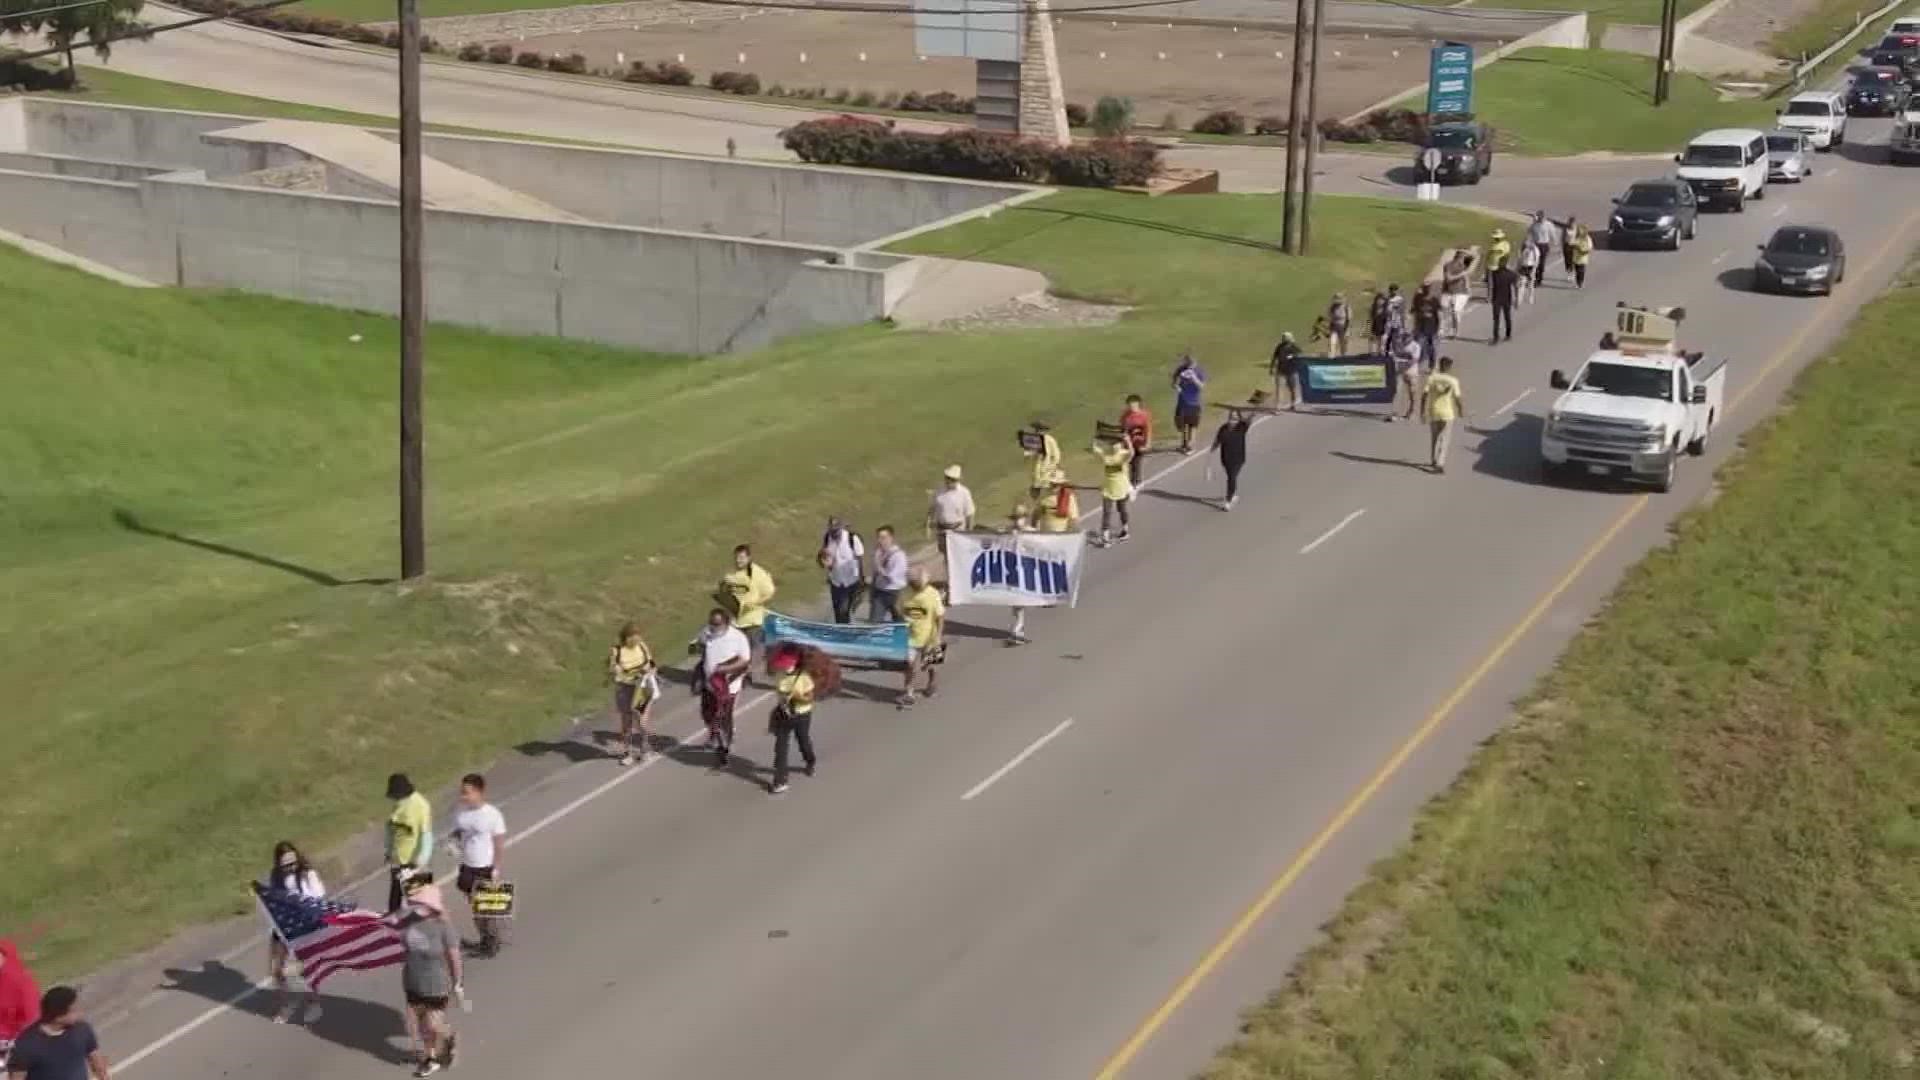 Friday the group completed its final leg of their 3-day march from Georgetown to Austin. Saturday they'll hold a rally at the state capitol.